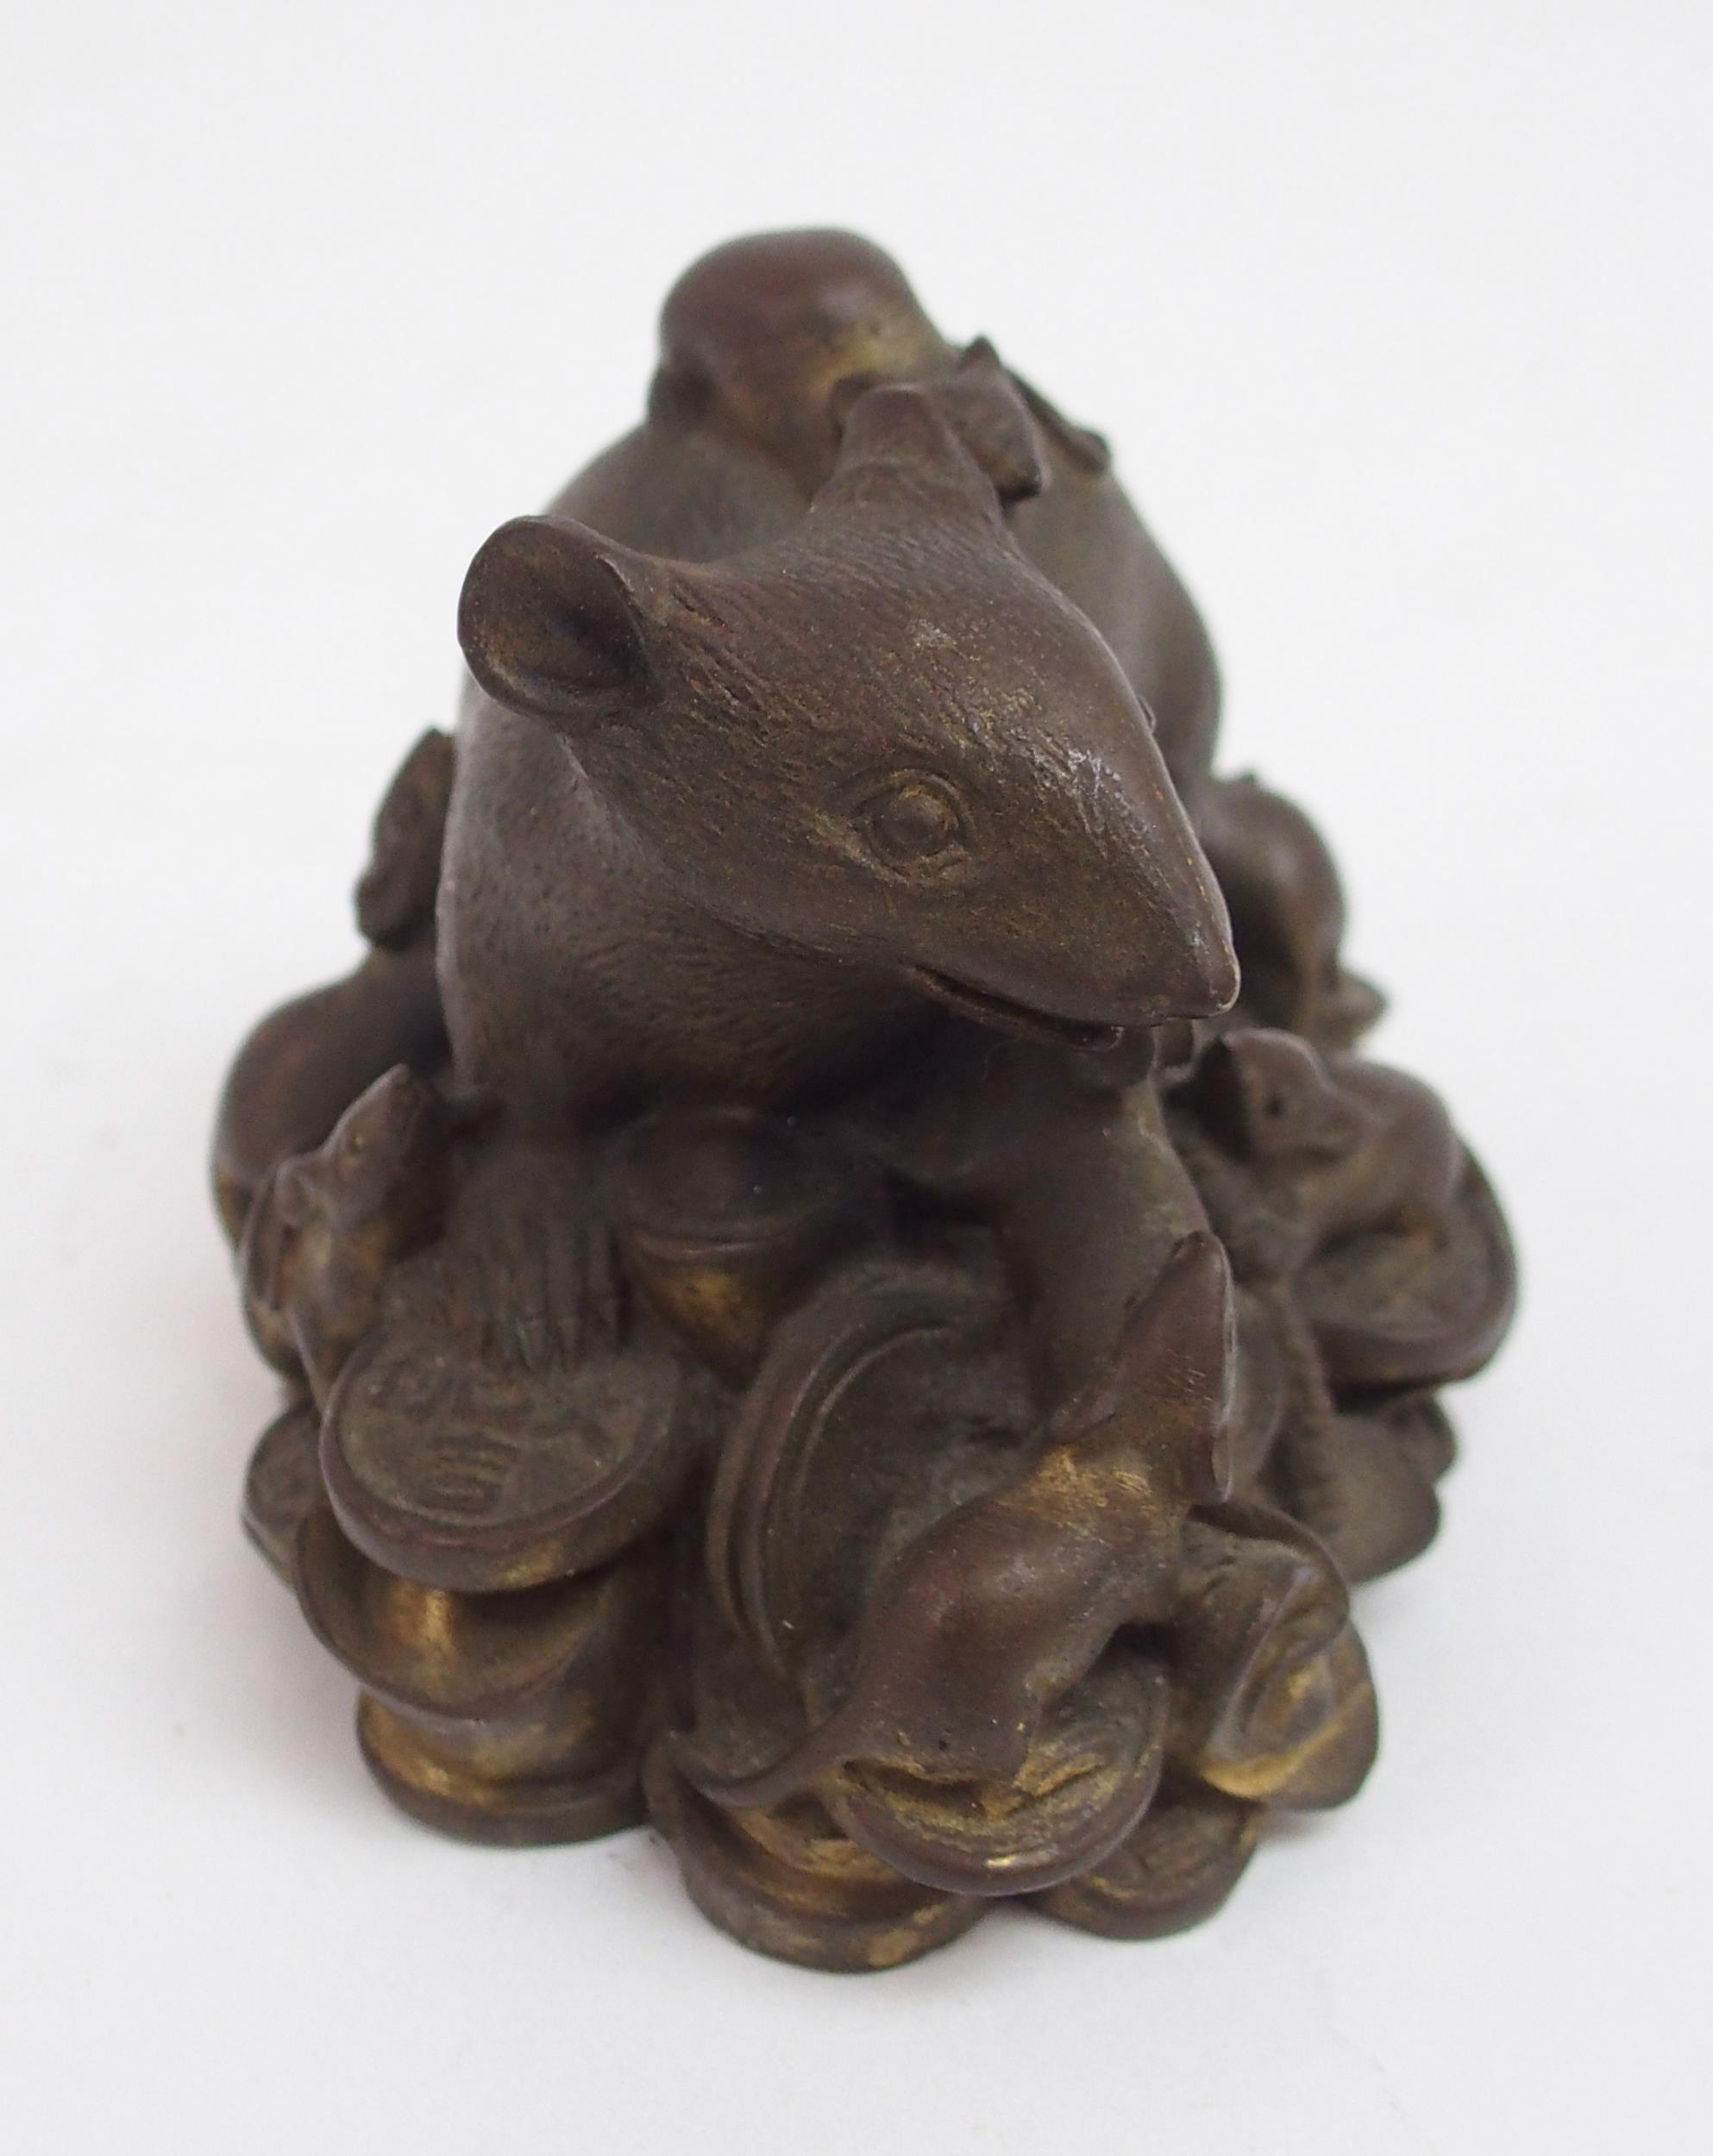 A CHINESE BRONZE FIGURE OF A RECUMBENT RAT modelled seated on a pile of archaic coins, surrounded by - Image 4 of 5